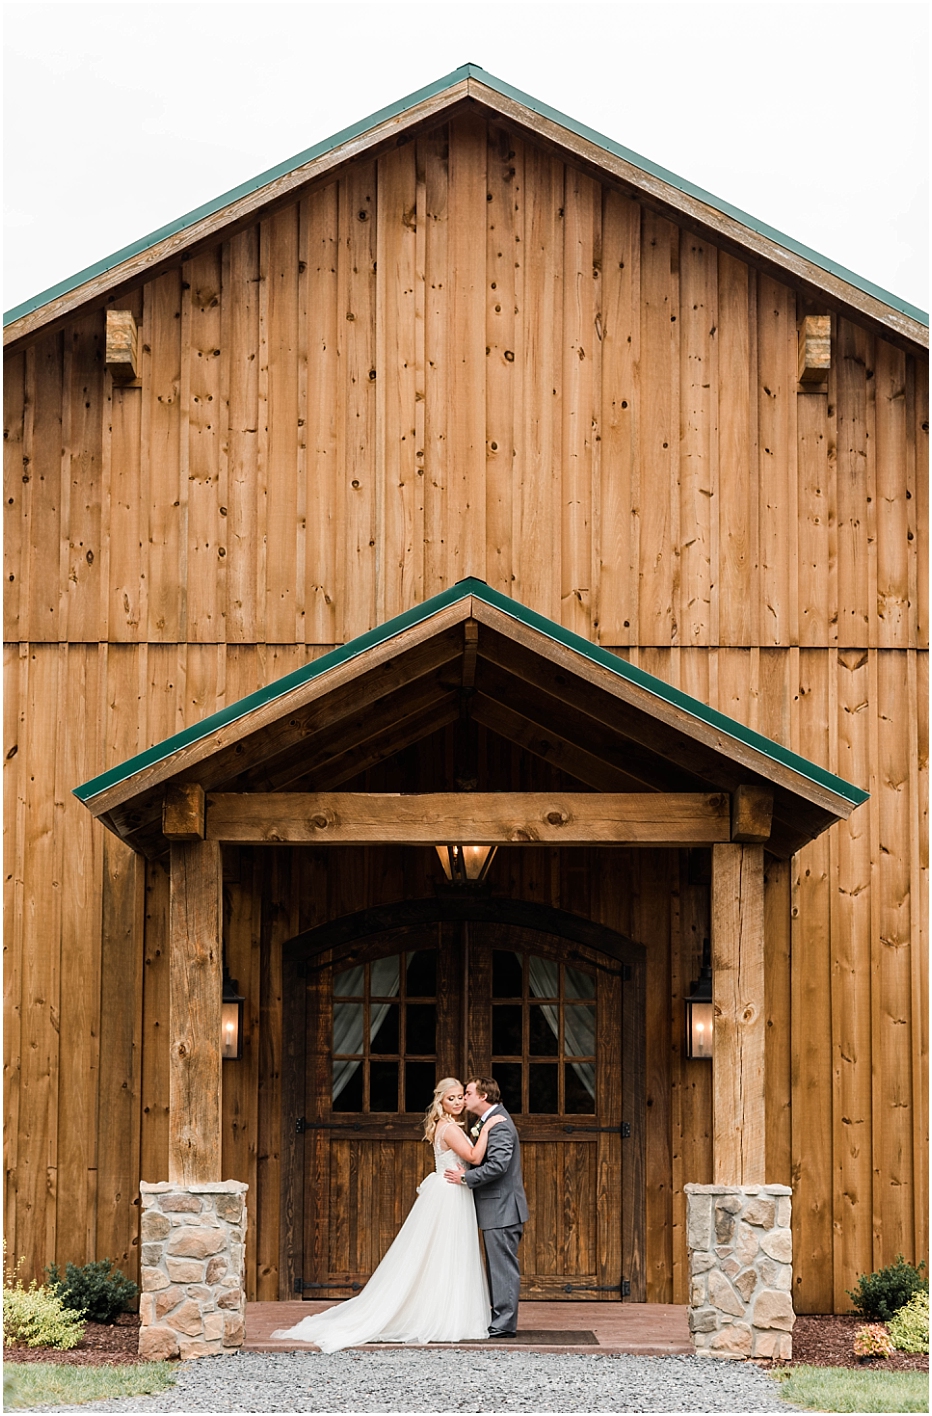 The Barn at Timber Creek Fall Wedding | Welsey + Zack